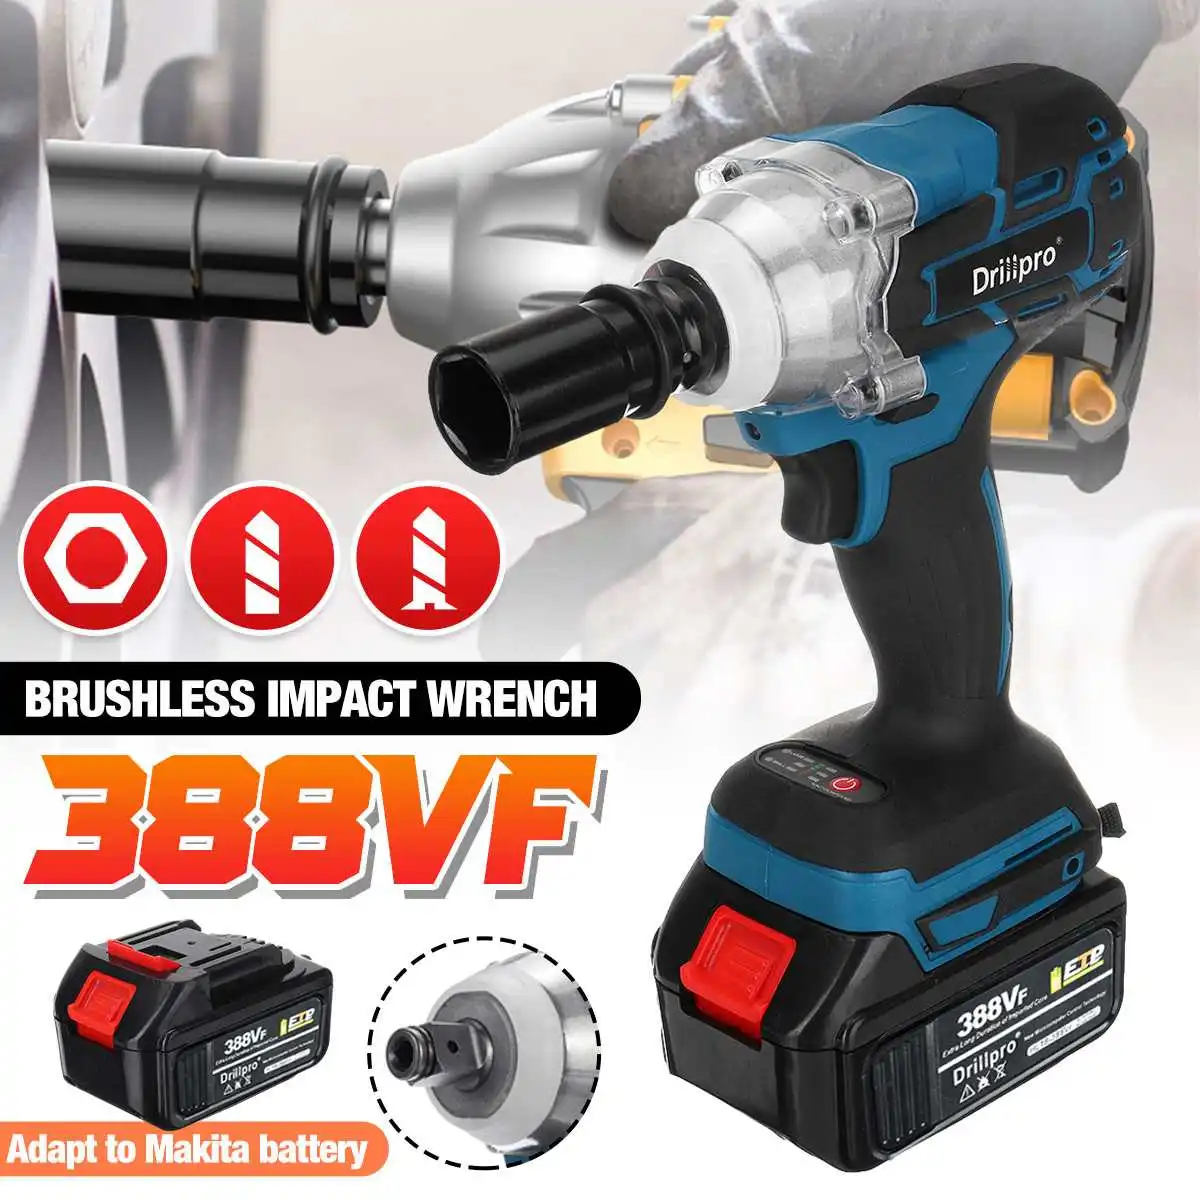 Drillpro 388VF Brushless Cordless Electric Impact Wrench Power Tools 15000Amh Li Battery with LED light Adapt to Makita battery